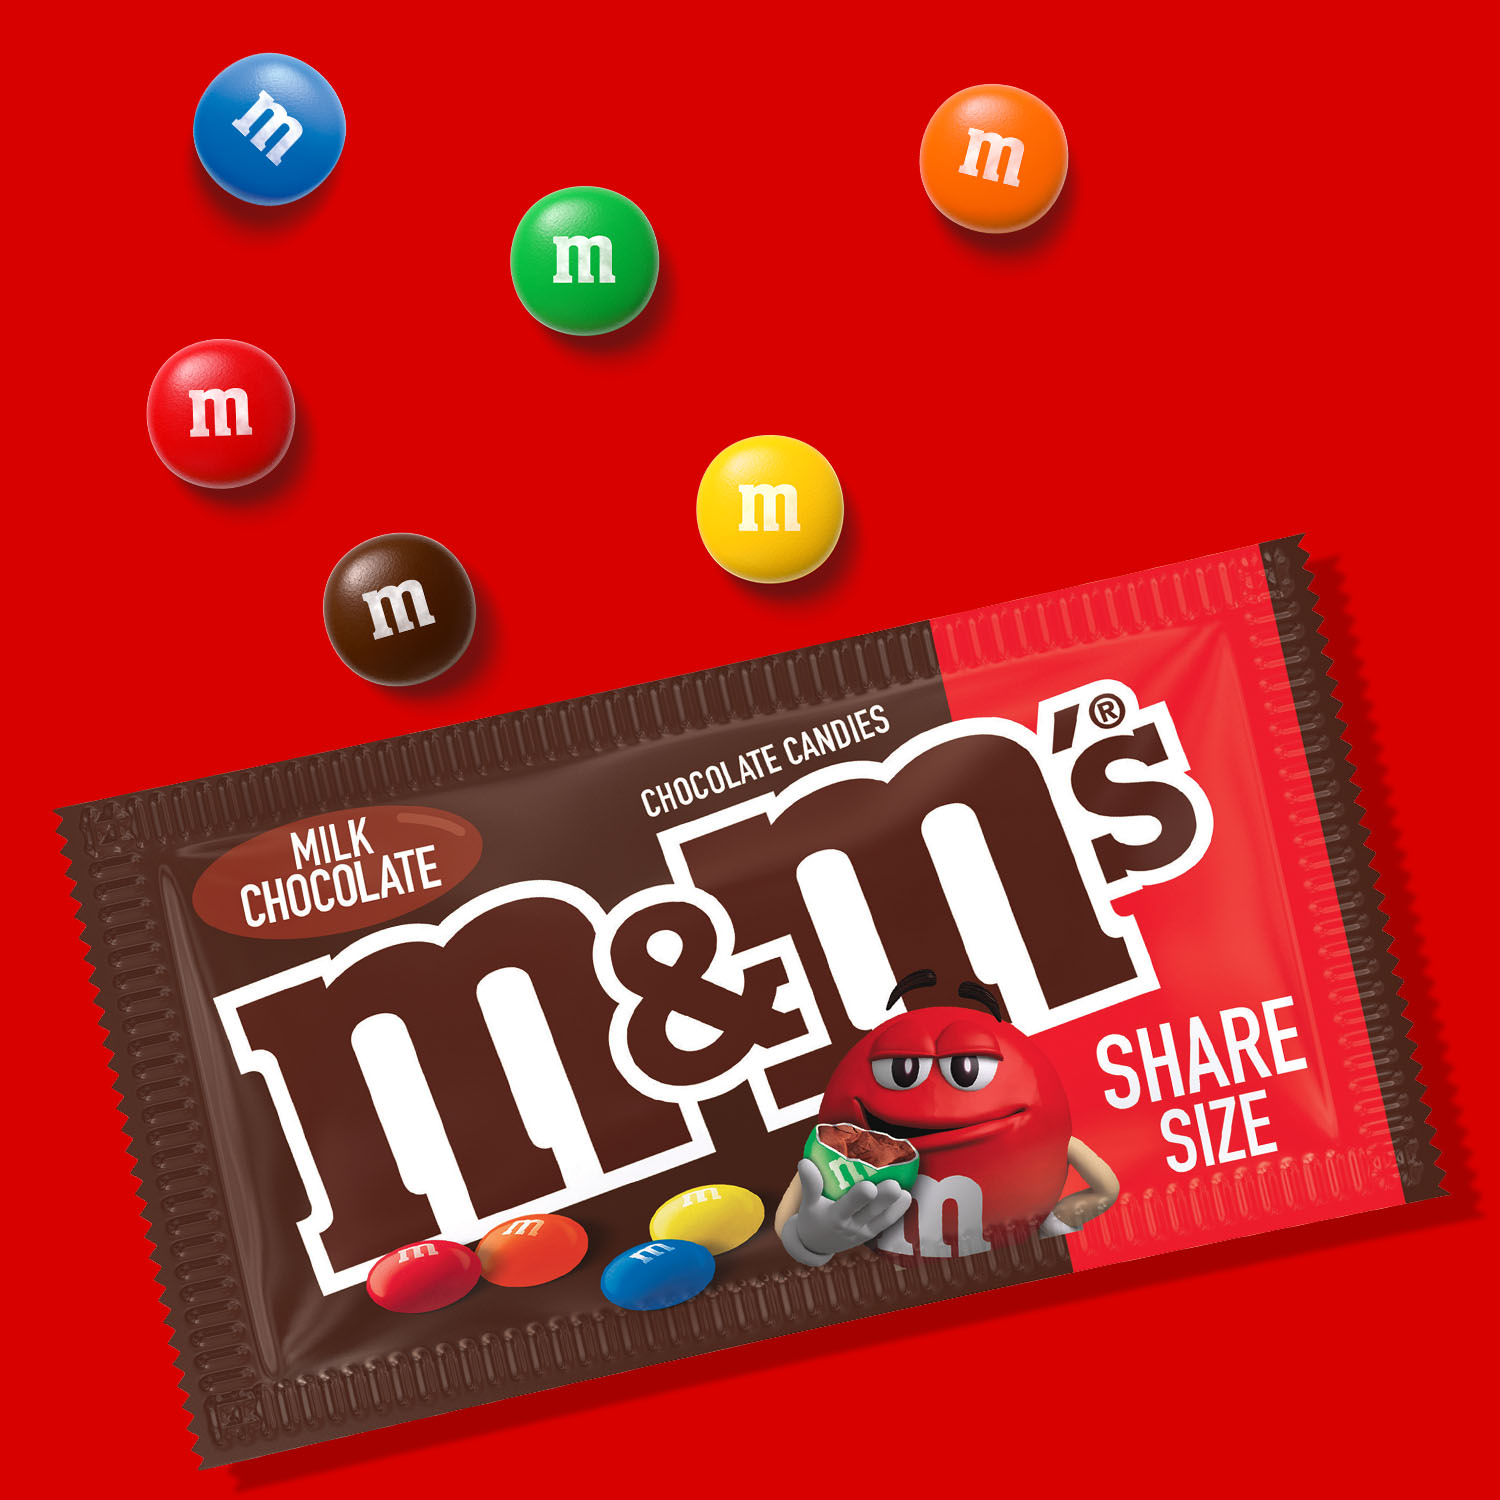 M&M's Milk Chocolate Candy, Share Size - 3.14 oz Bag - image 2 of 12